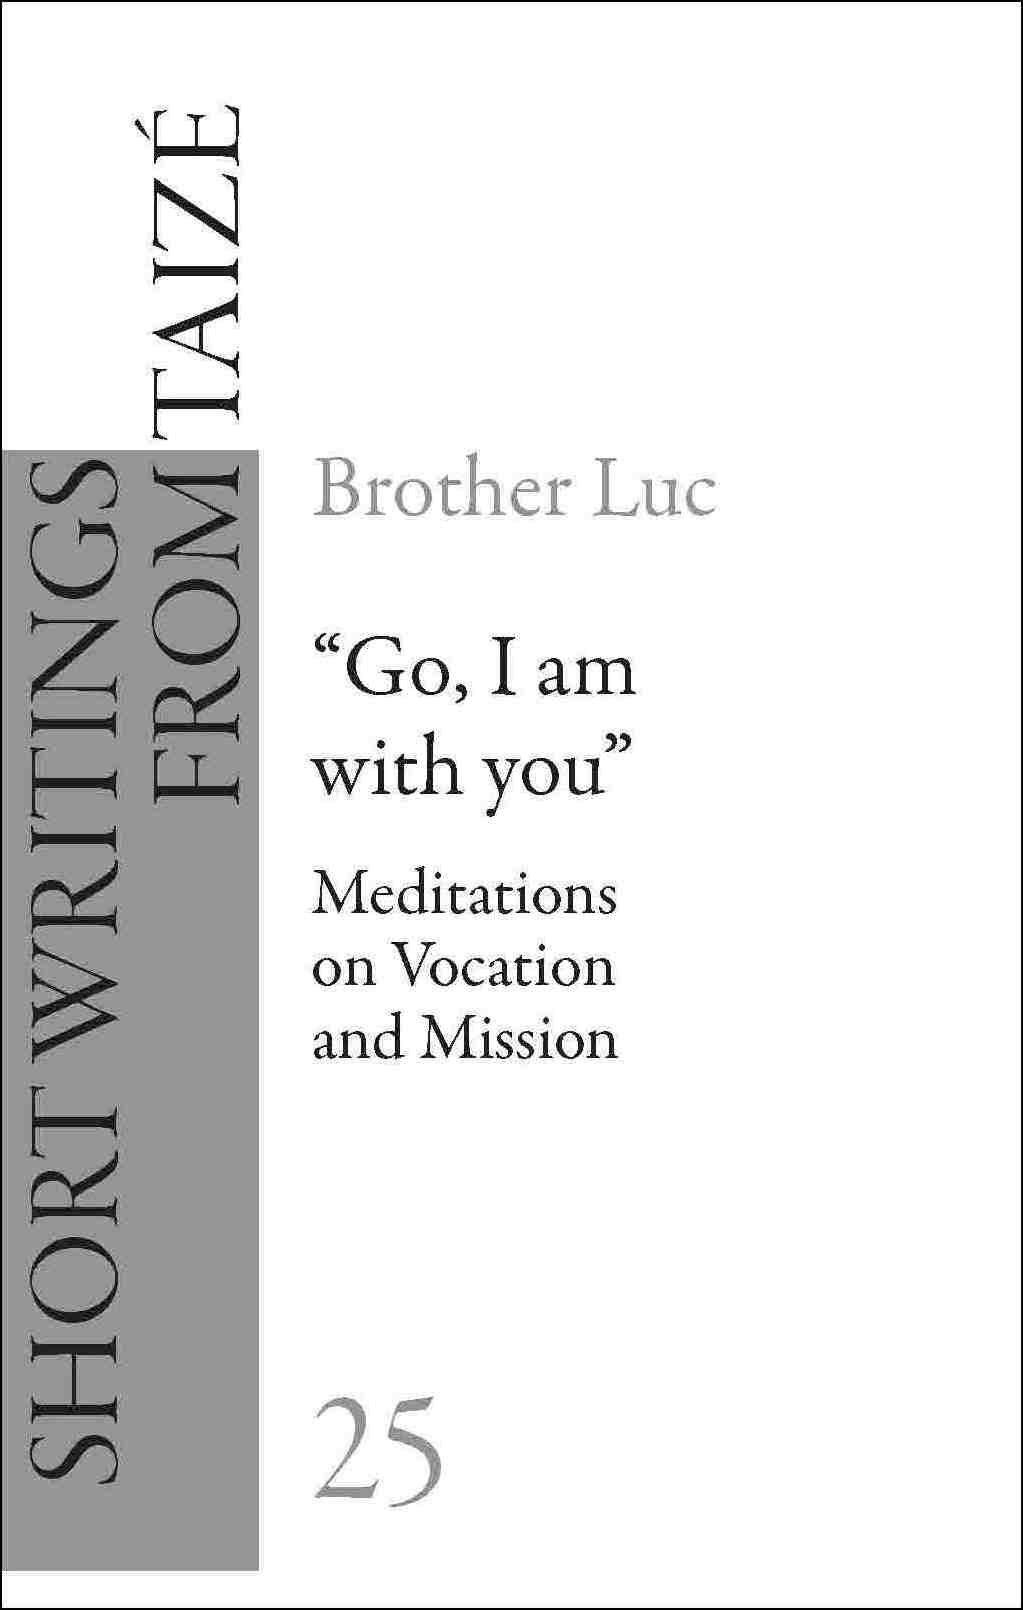 G25 "Go, I am with you" - Meditations on Vocation and Mission